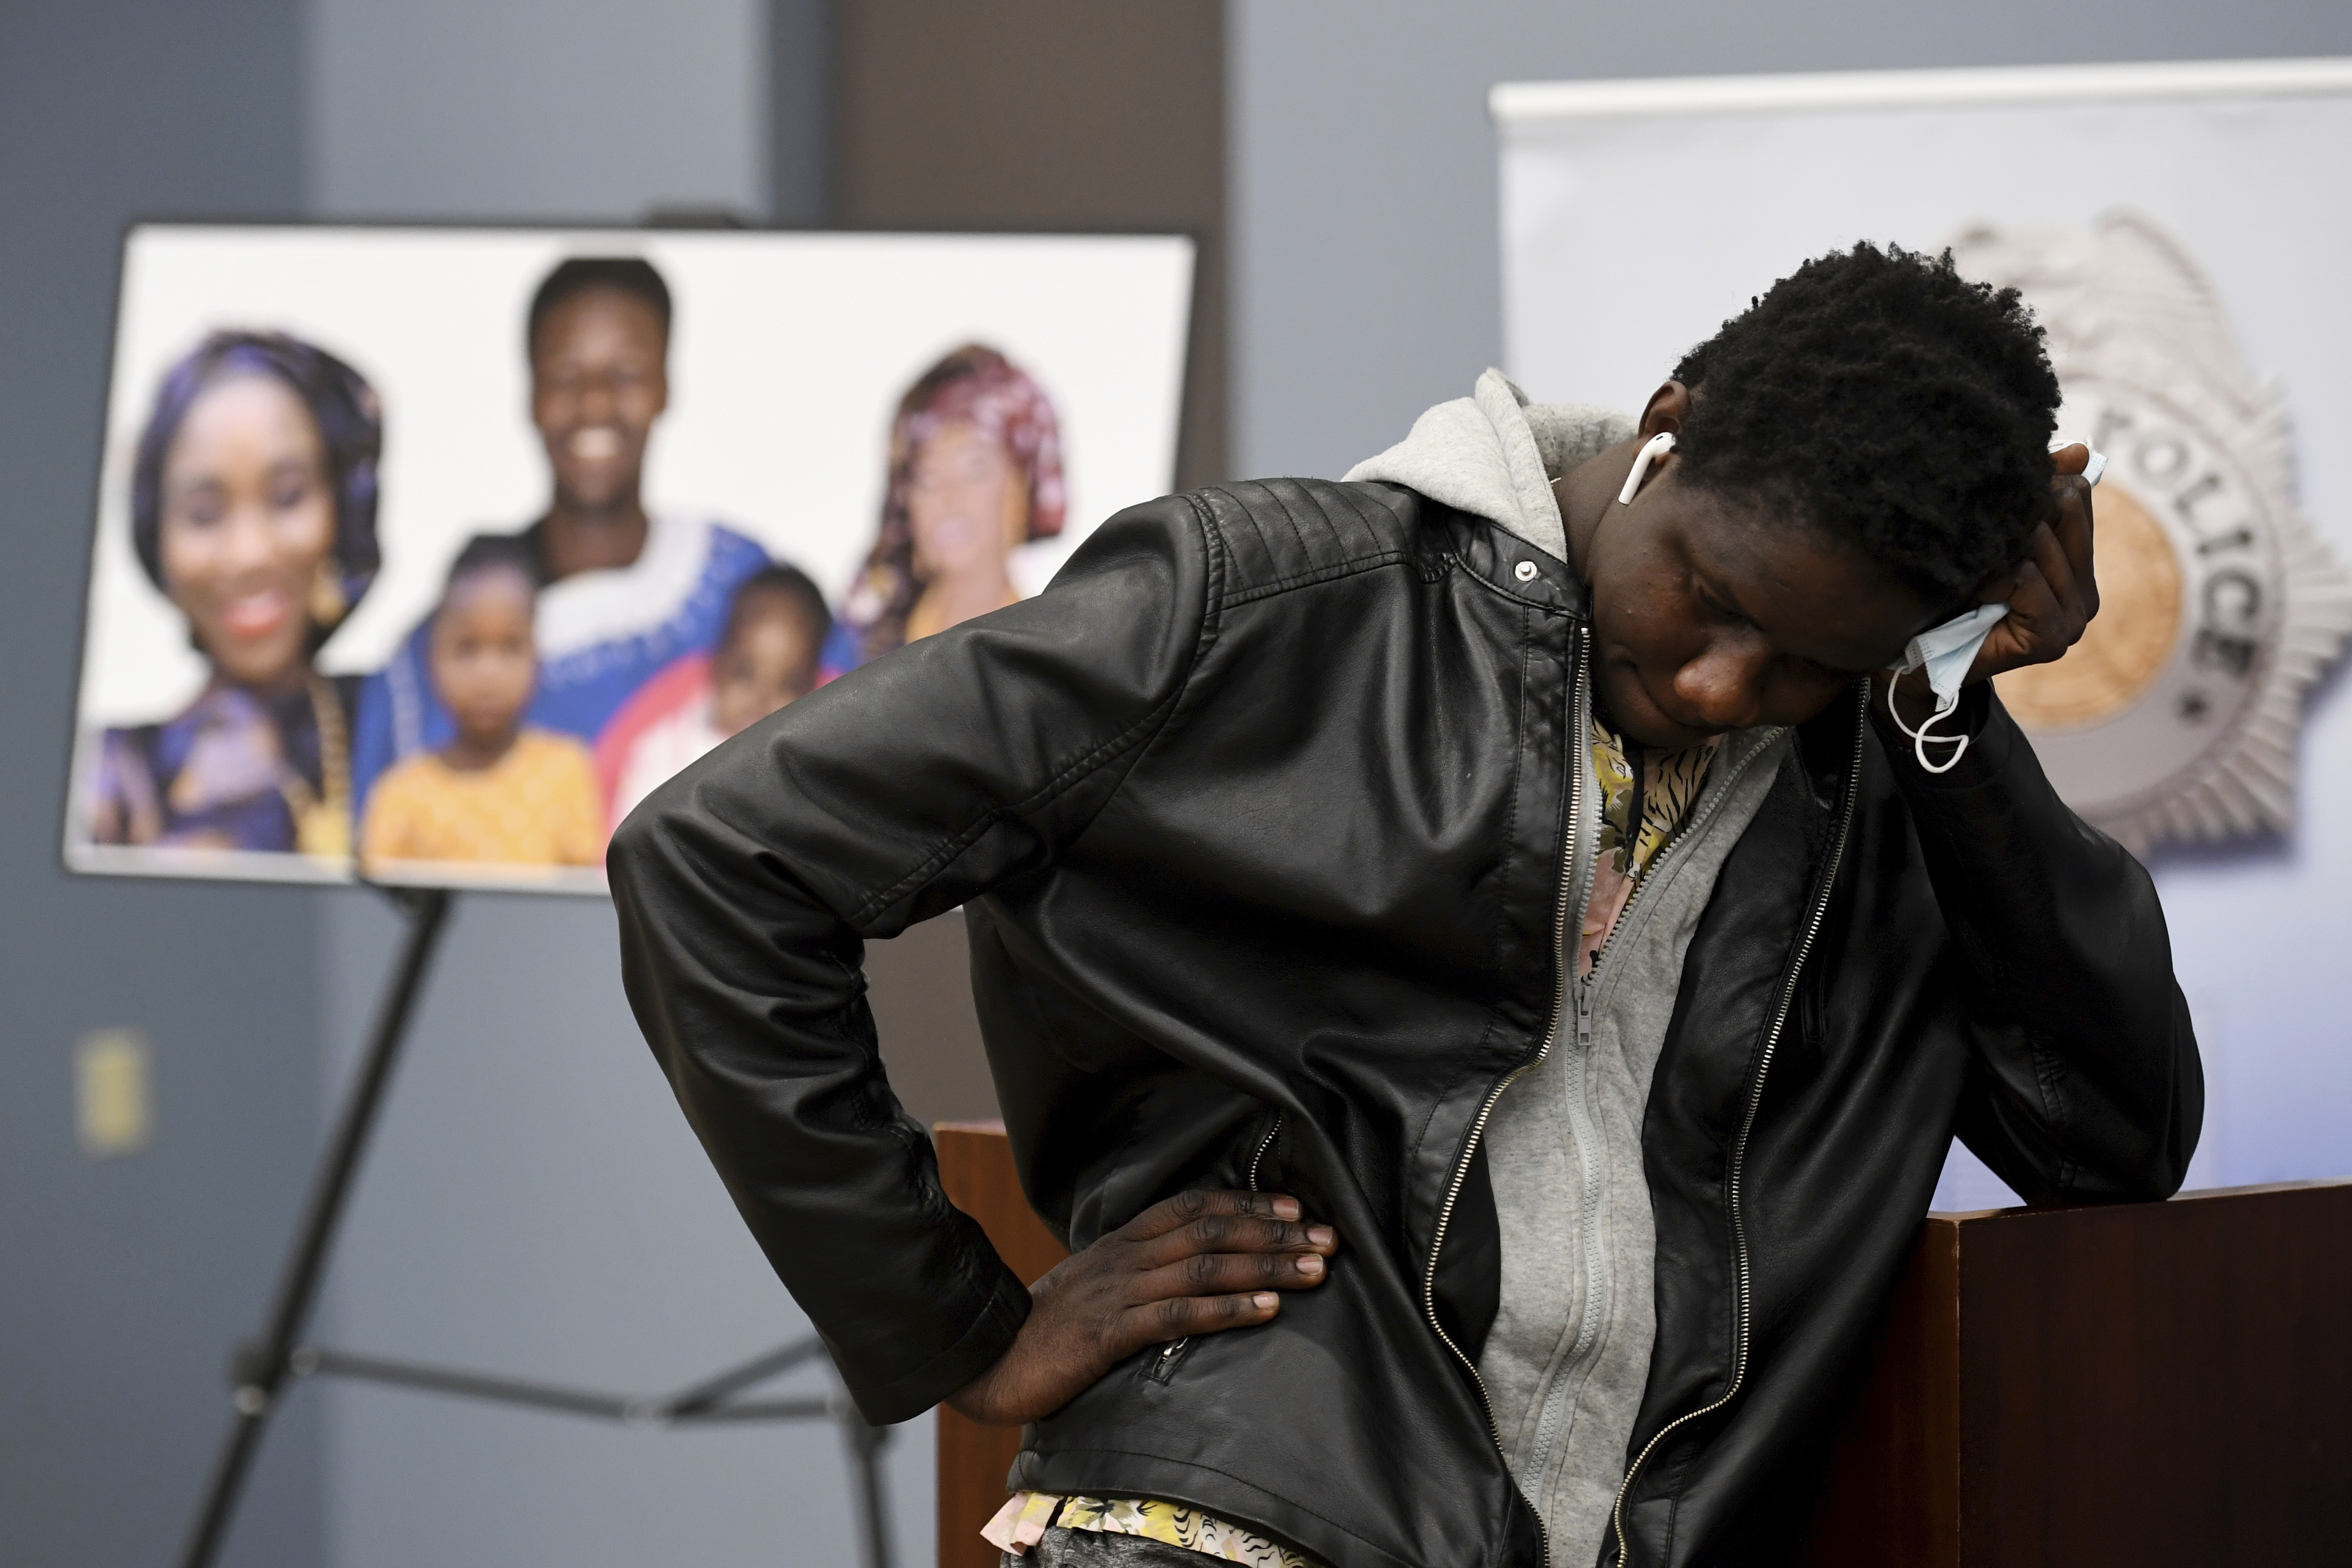 FILE- Abou Diol holds his head next to a picture of his brother, Djibril Diol, after a Denver Police news conference Jan. 27, 2021, at Denver Police Crime Laboratory in Denver. Kevin Bui has been sentenced to 60 years in prison, Tuesday, July 2, 2024, after he pleaded guilty to murder charges for starting a 2020 house fire that killed five members Diol's family. (Hyoung Chang/The Denver Post via AP, File)